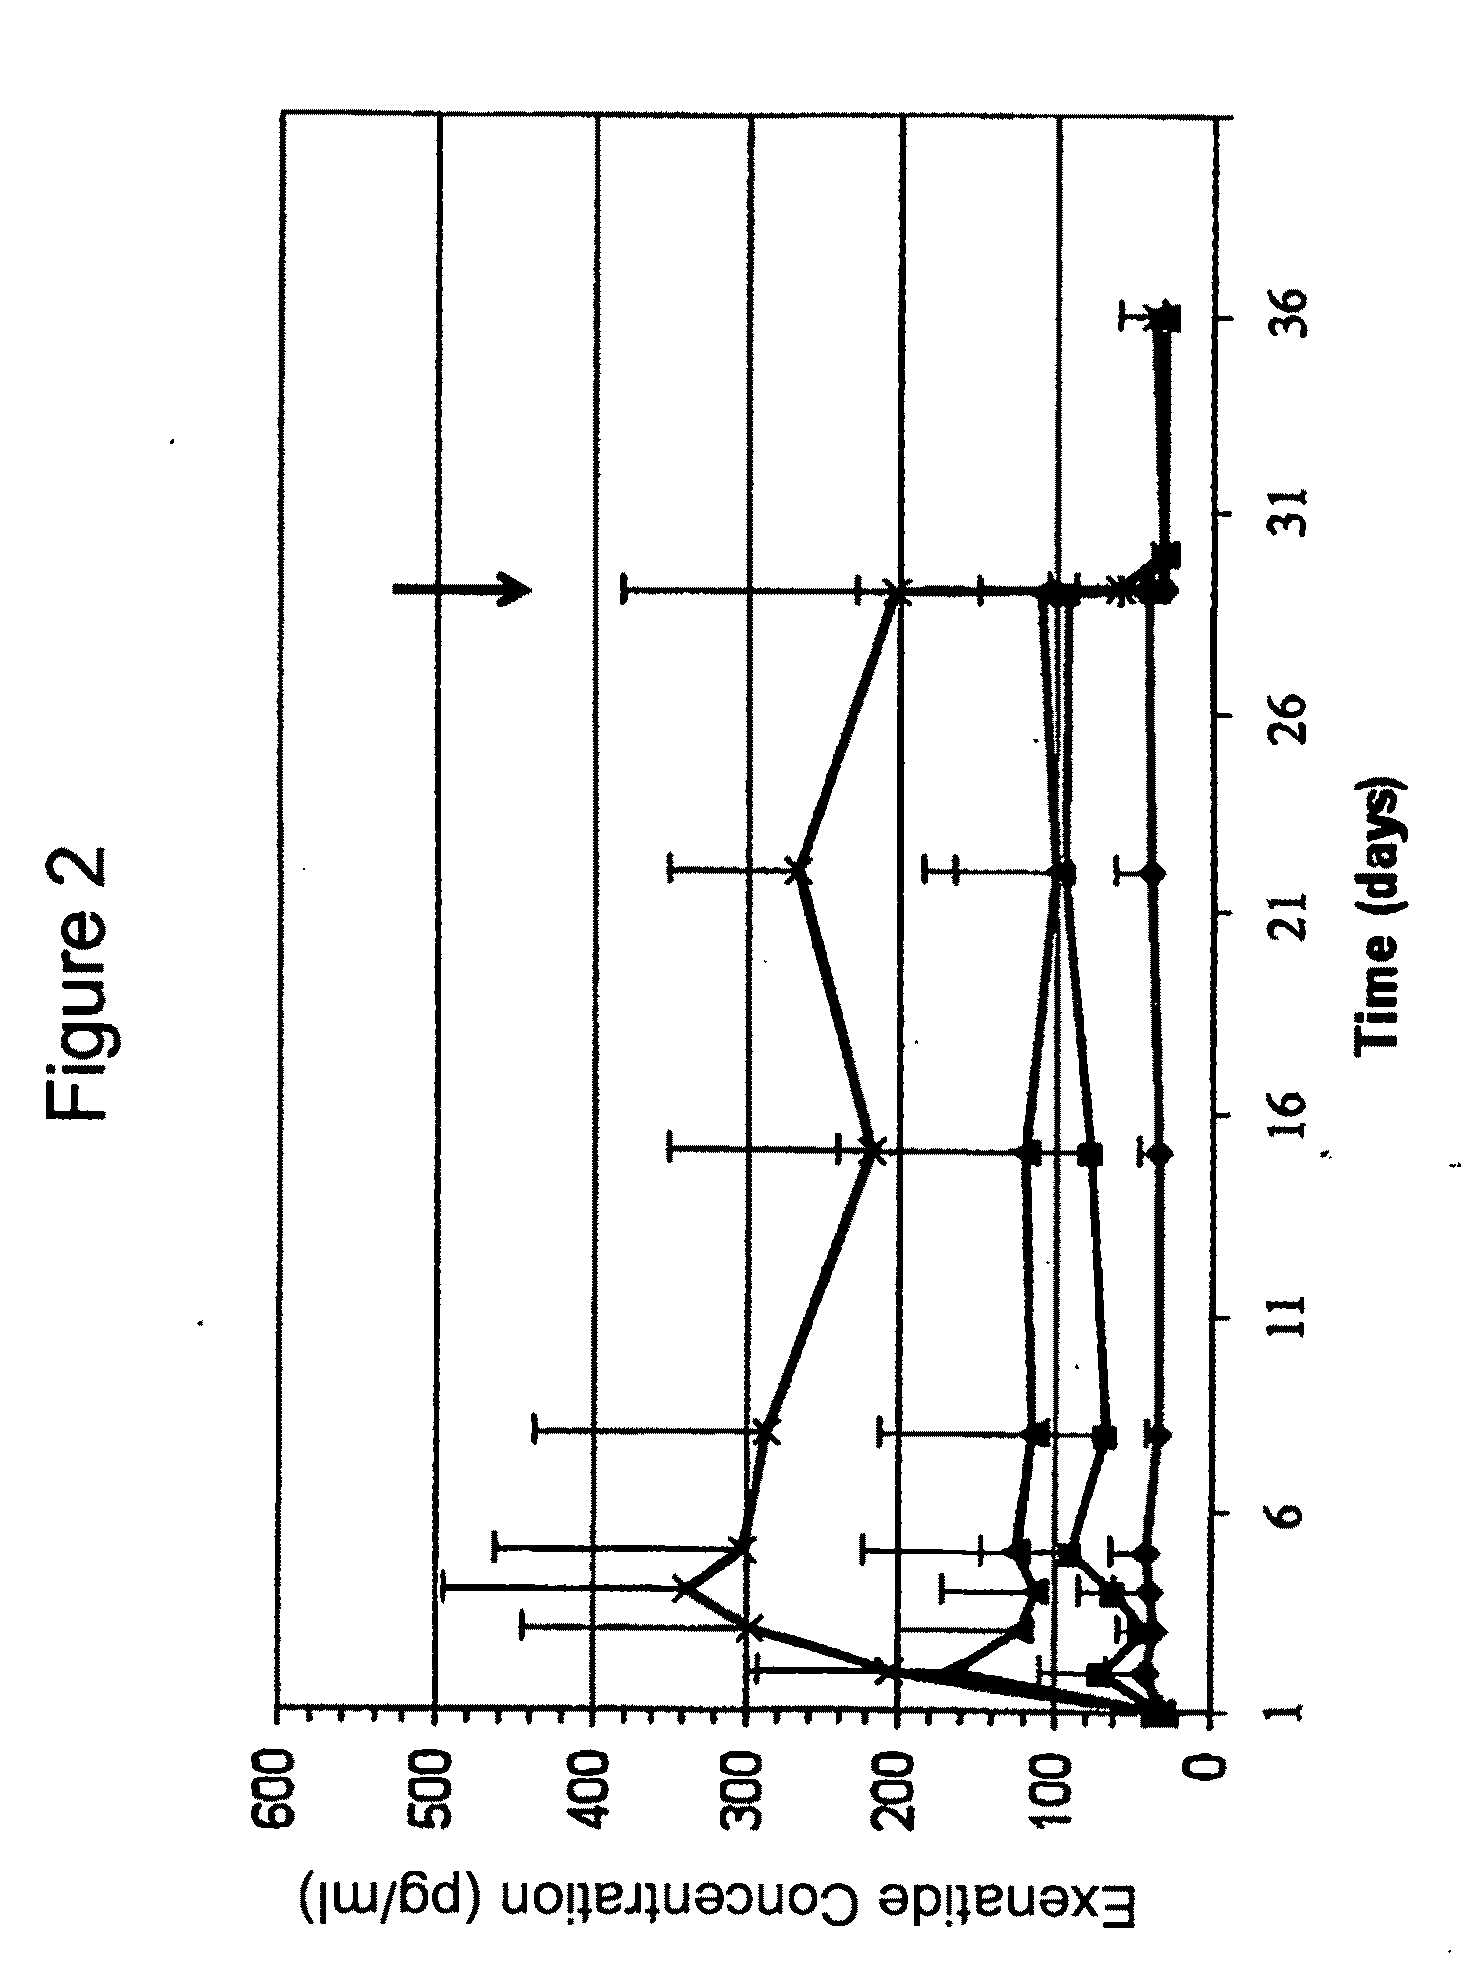 Rapid establishment and/or termination of substantial steady-state drug delivery